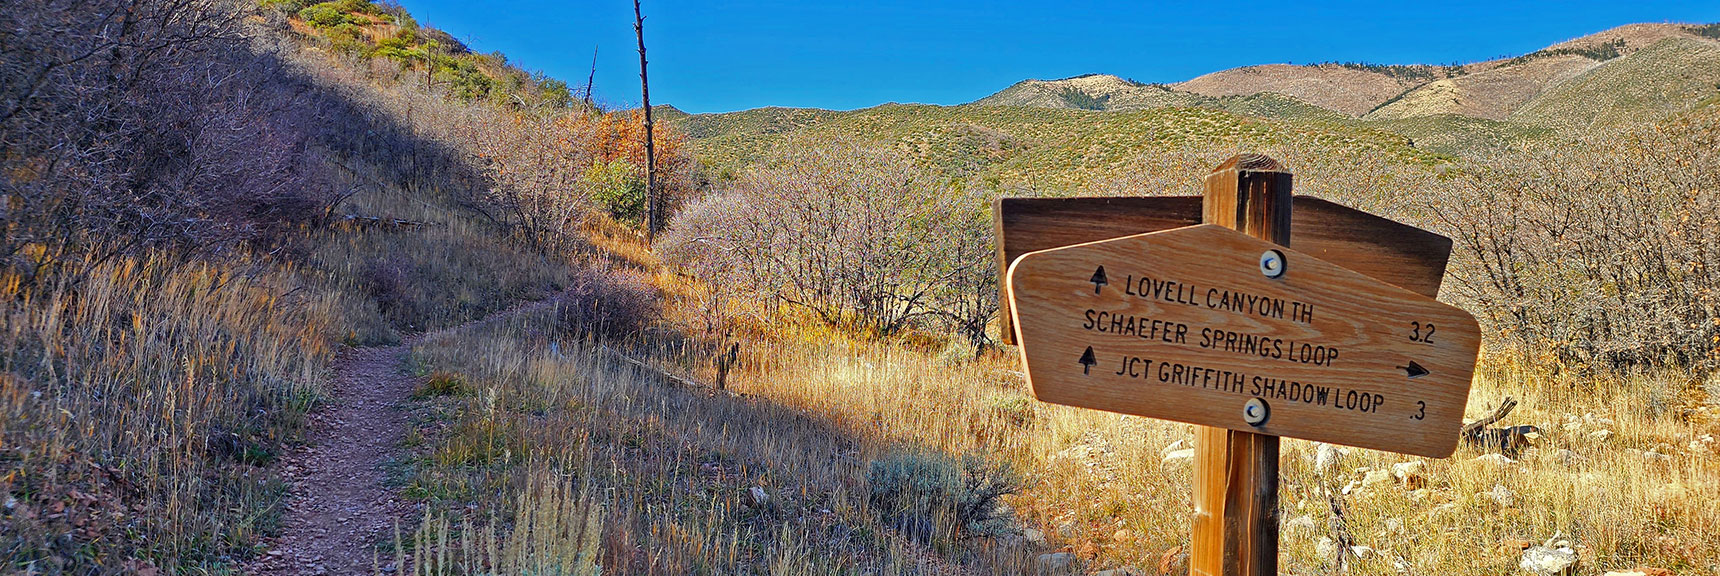 Sign at Trailhead for Schaefer Springs Loop | Lovell Canyon Loop Trail | Lovell Canyon Nevada